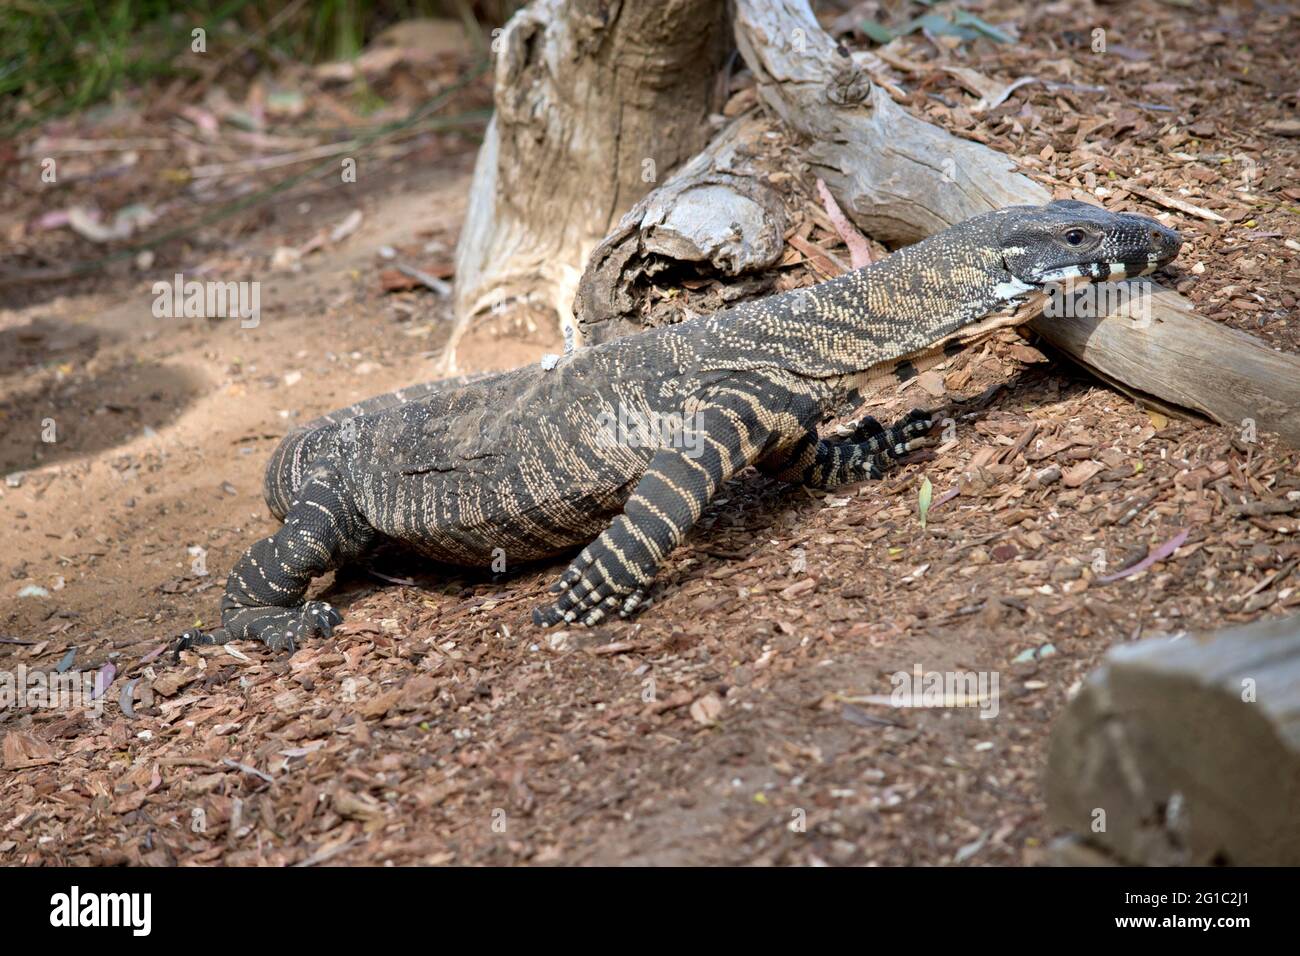 the lace monitor lizard eats small animals and fruit. they are the second largest lizard in Australia Stock Photo